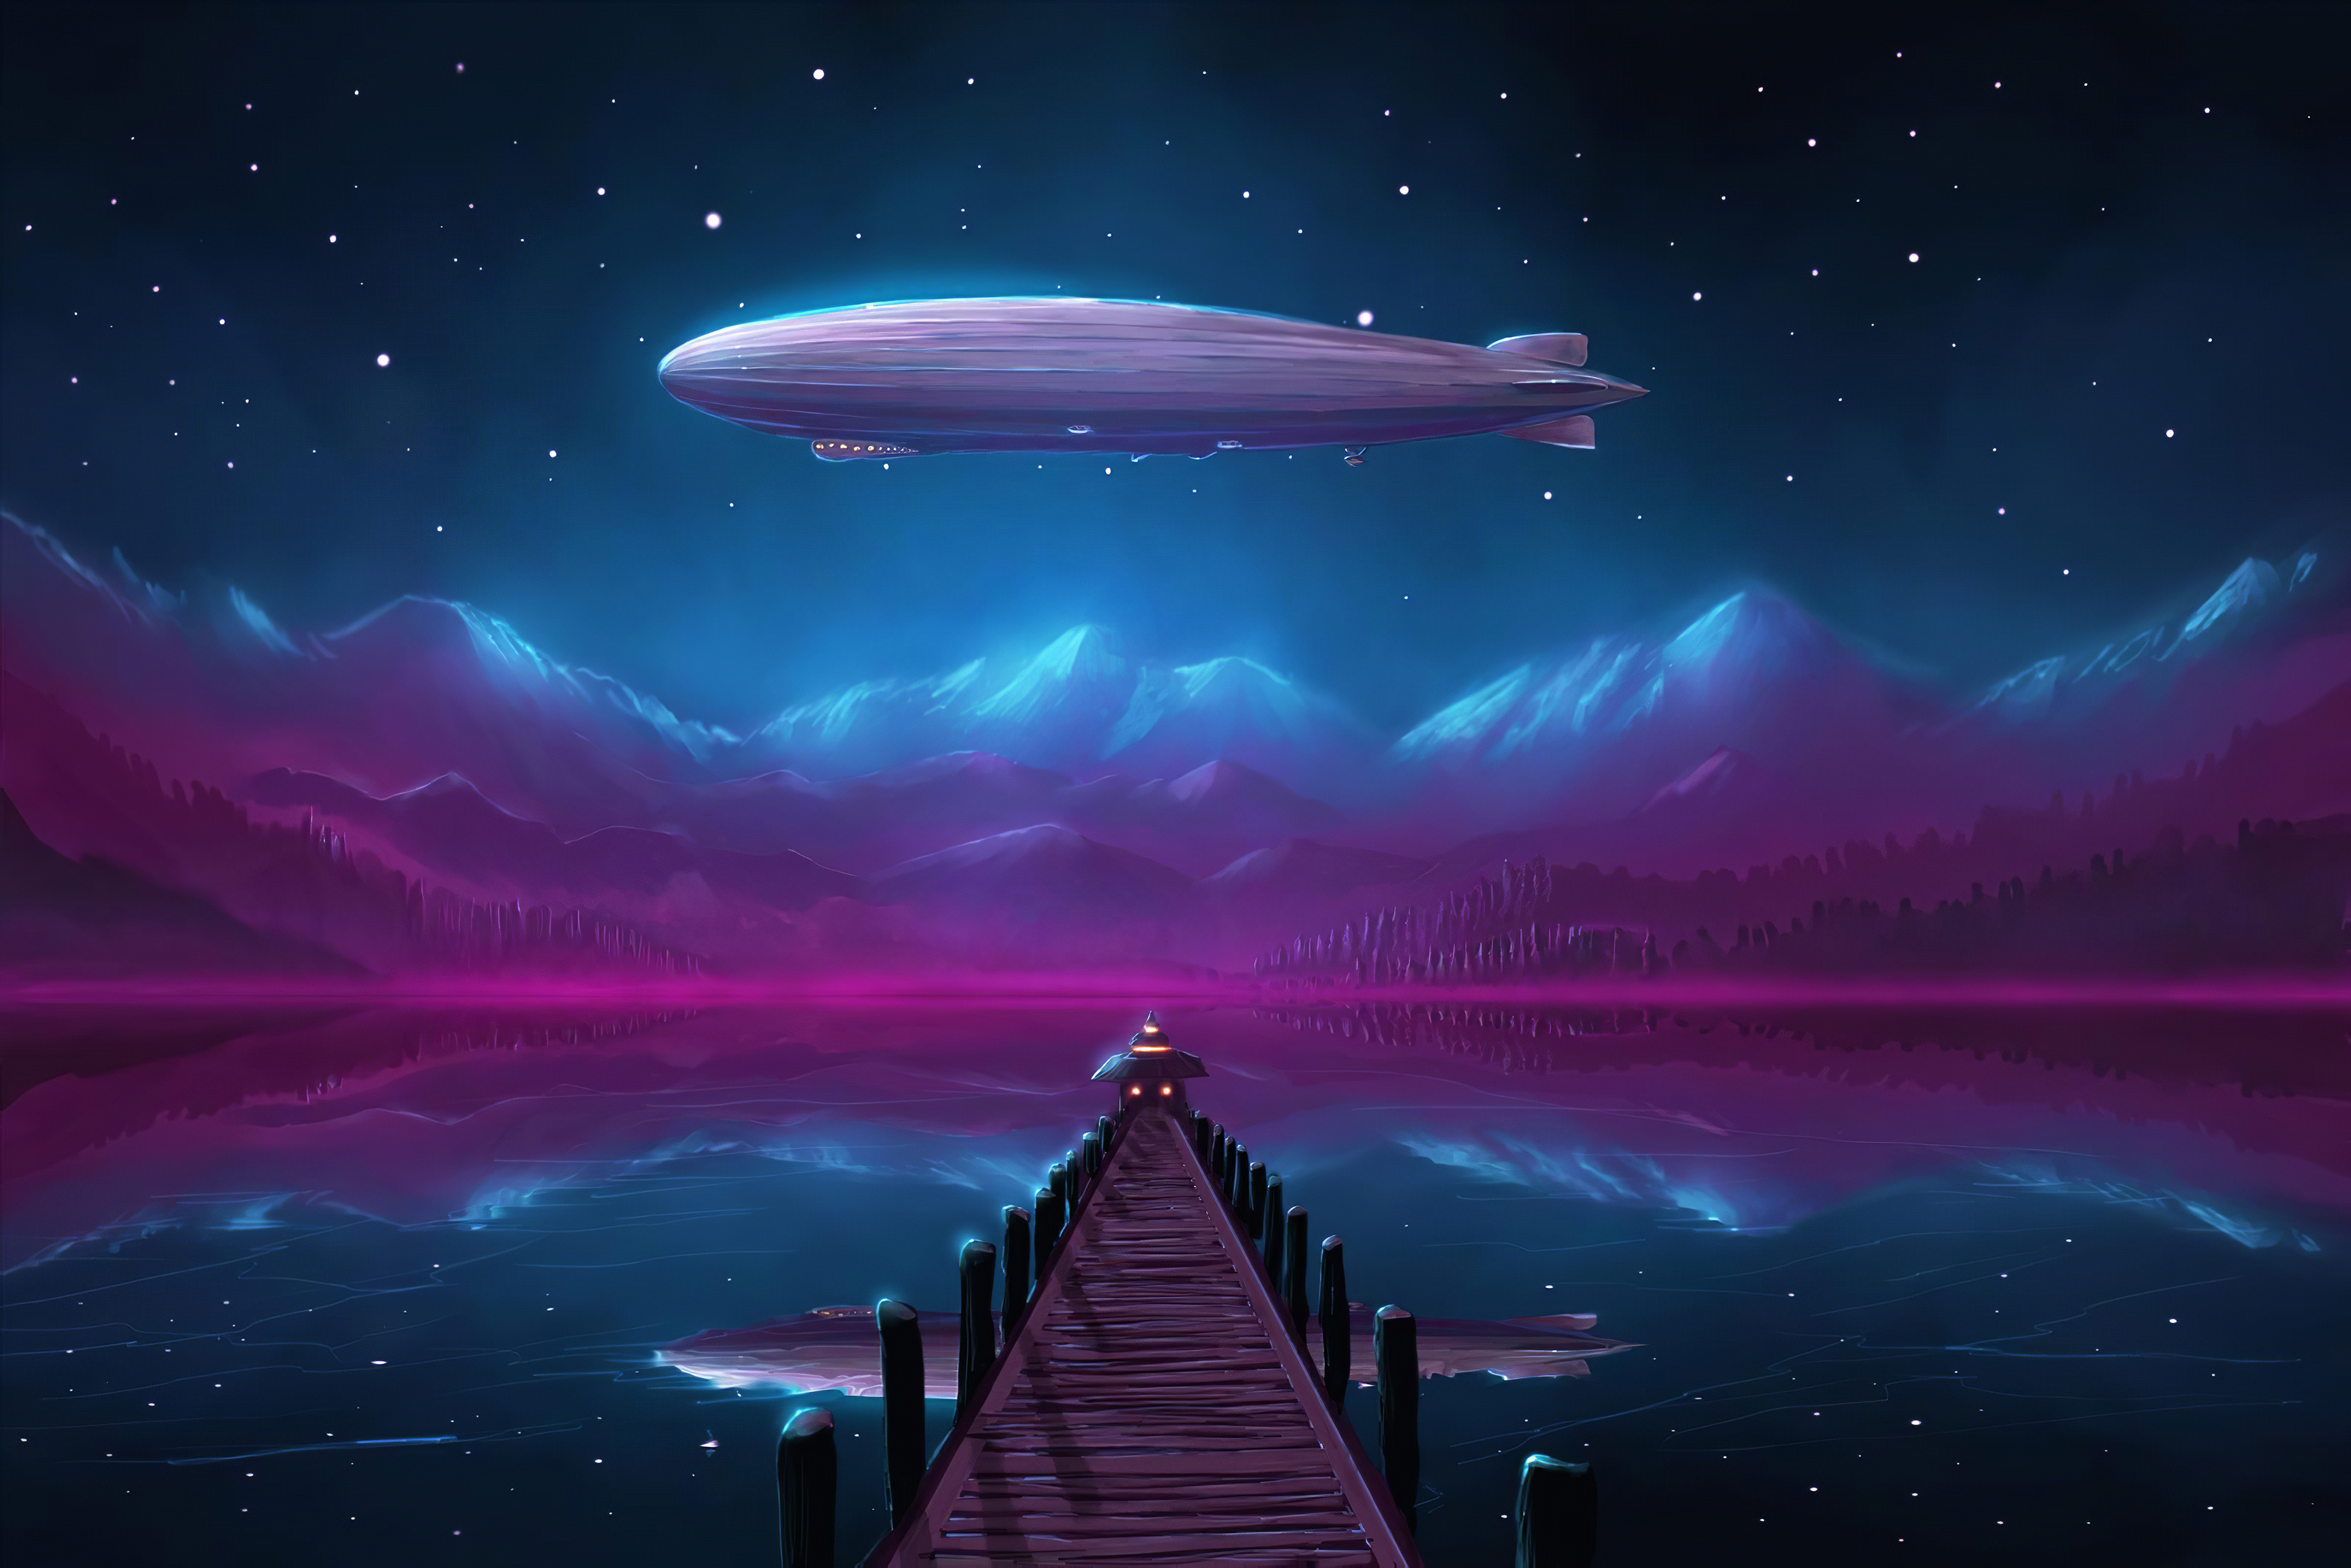 Zeppelin over Lake Pier at Night by ShootingStarLogBook